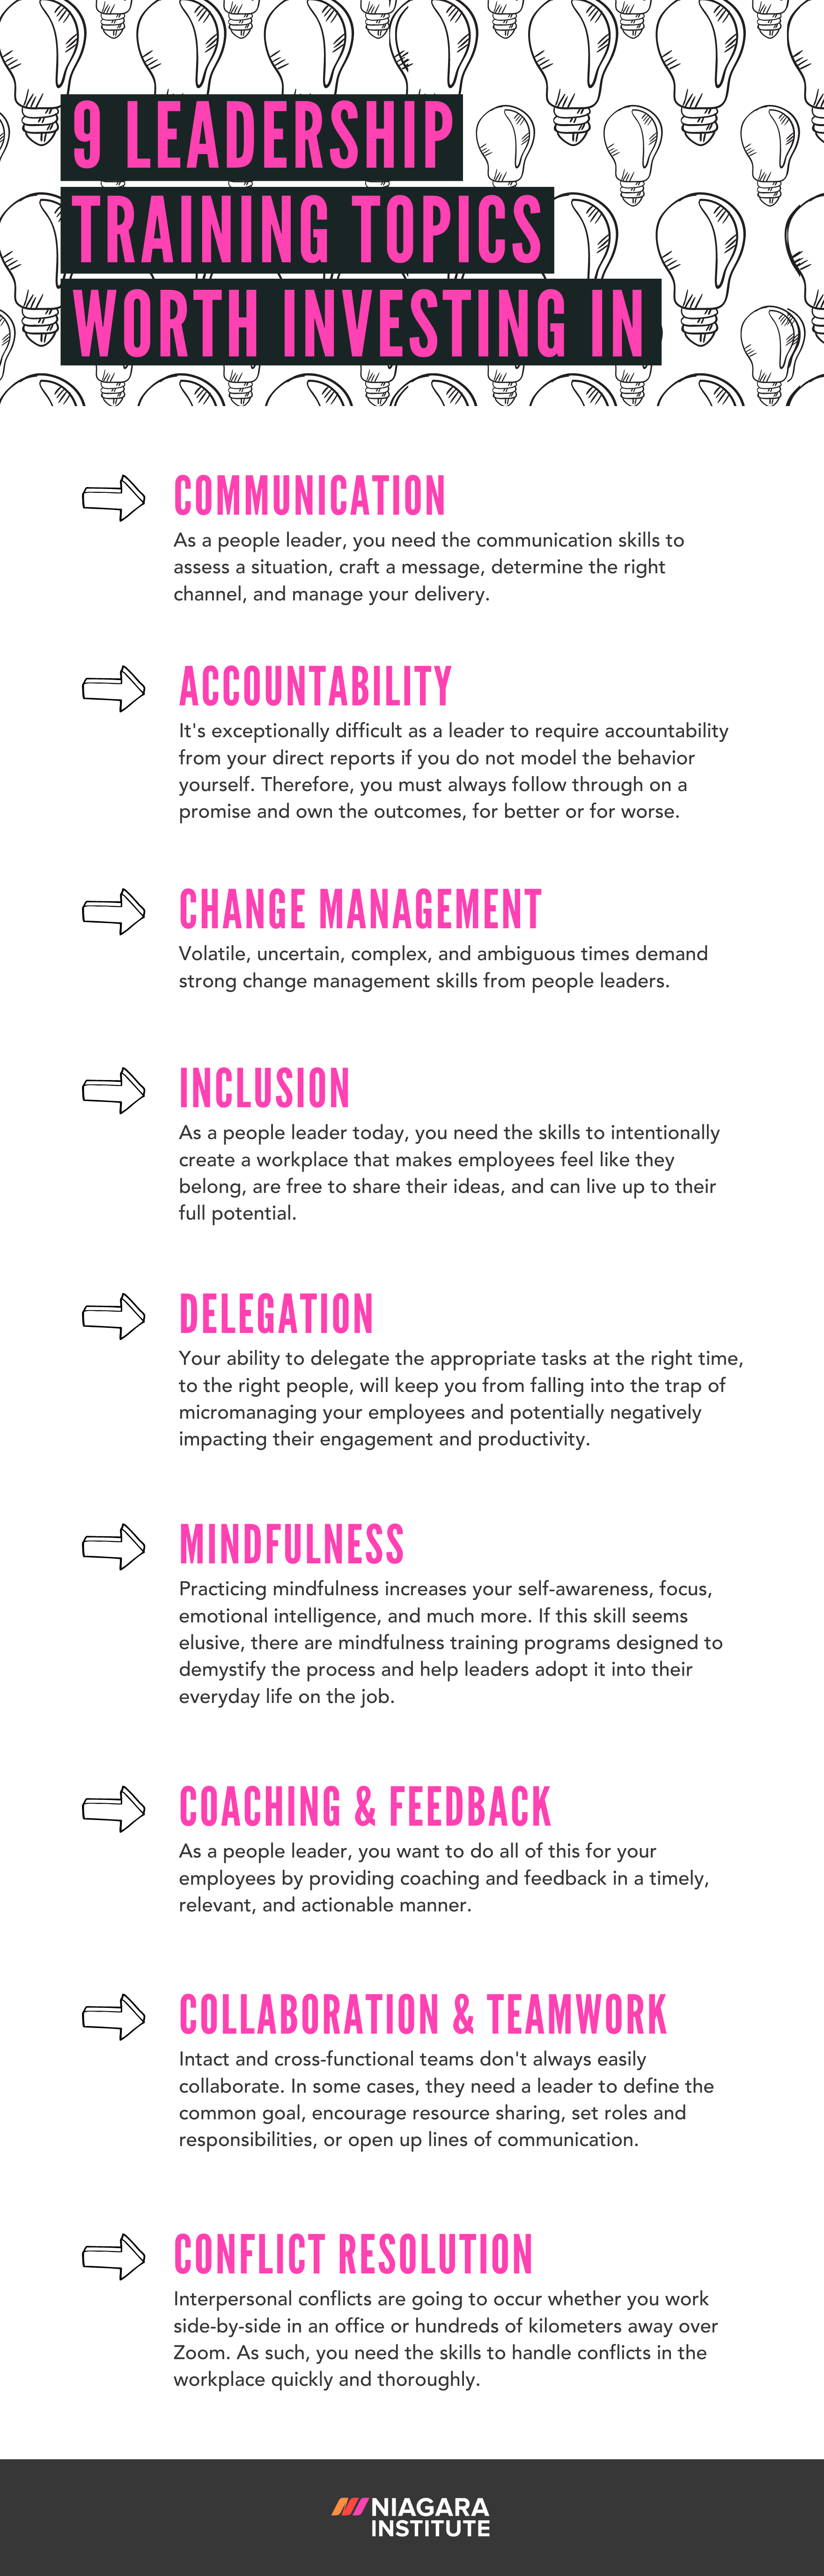 Infographic Leadership Training Topics Worth Investing In